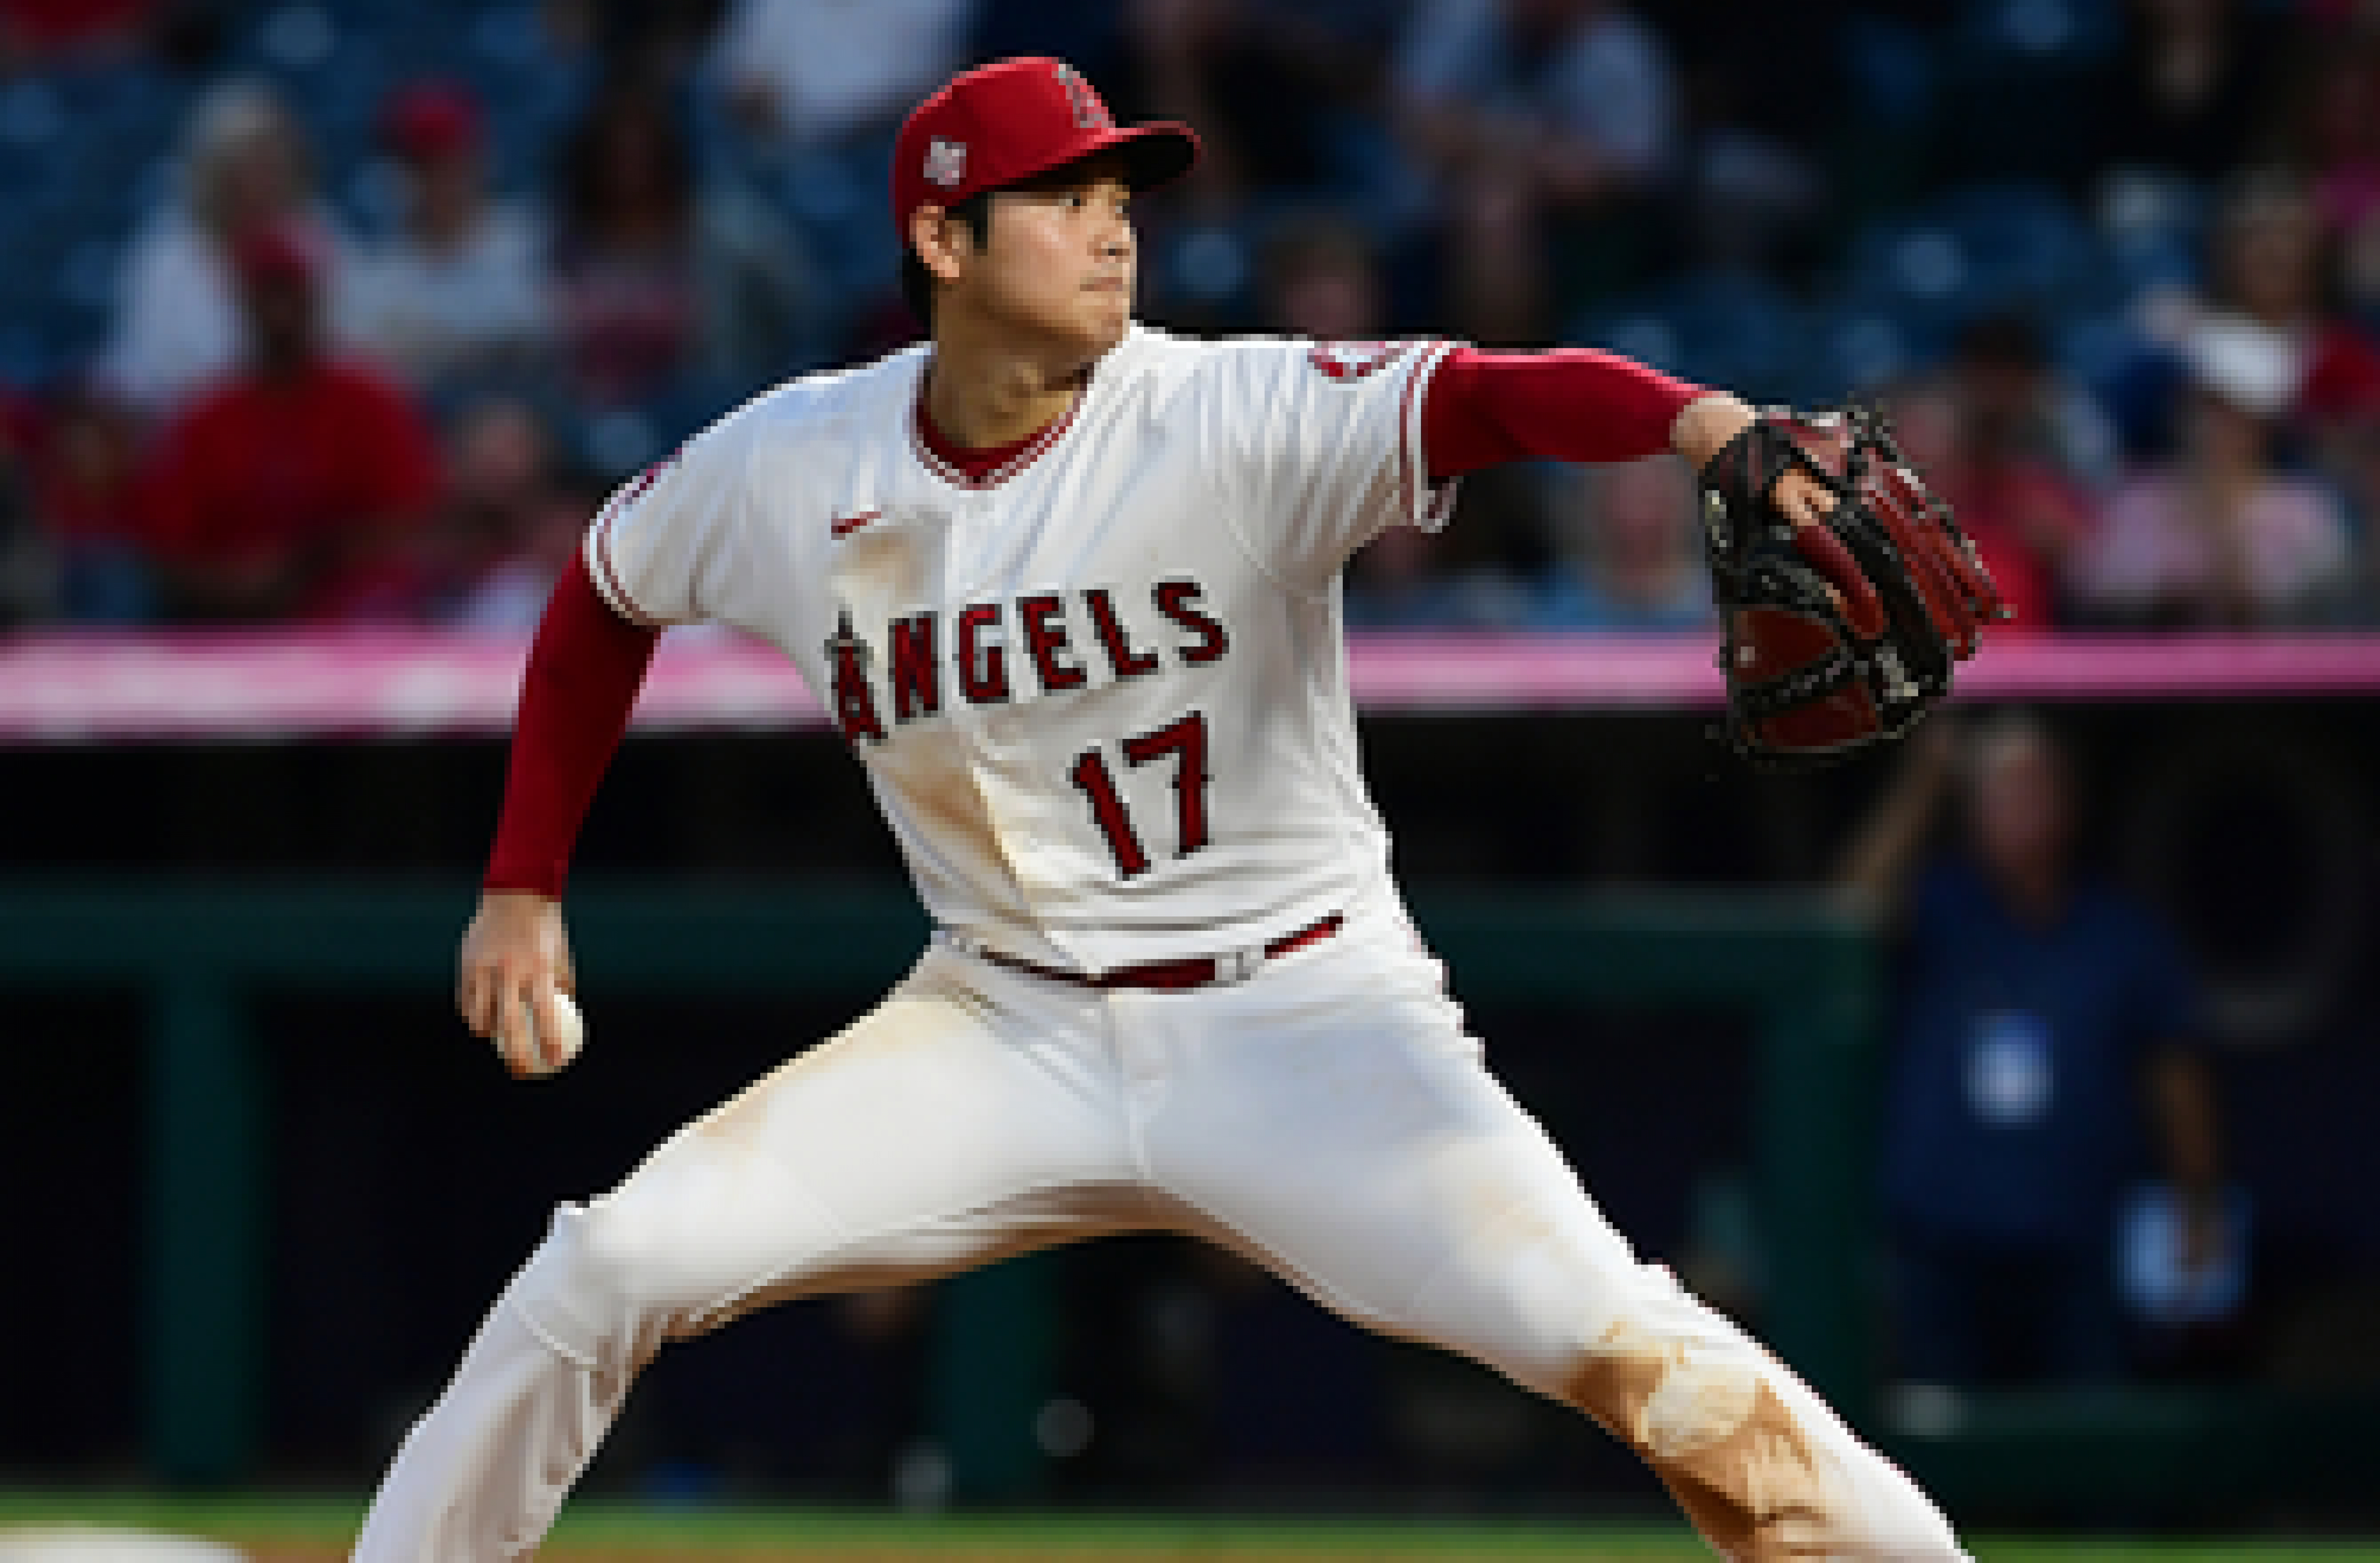 Shohei Ohtani strikes out five, drives in a run to lead Angels over Rockies, 6-2